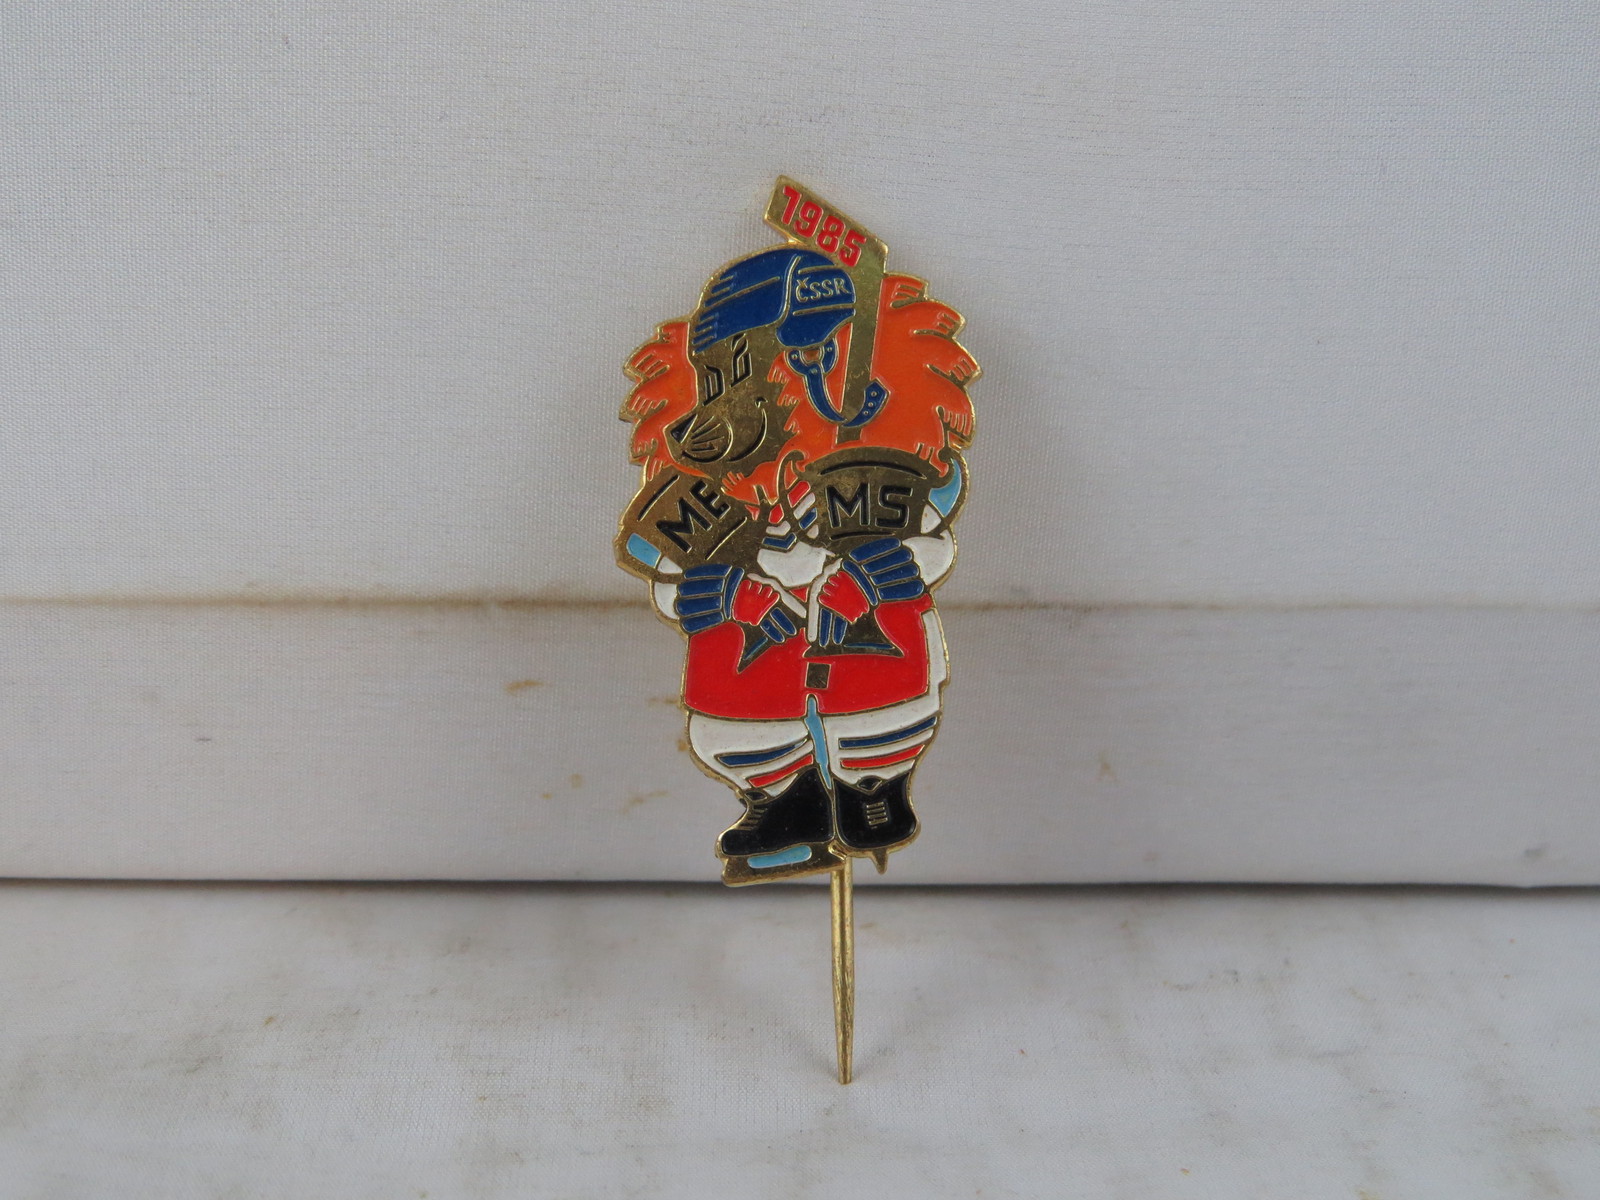 Primary image for Vintage Hockey Pin - Czechoslovakia World Champions 1985 - Stick Pin 